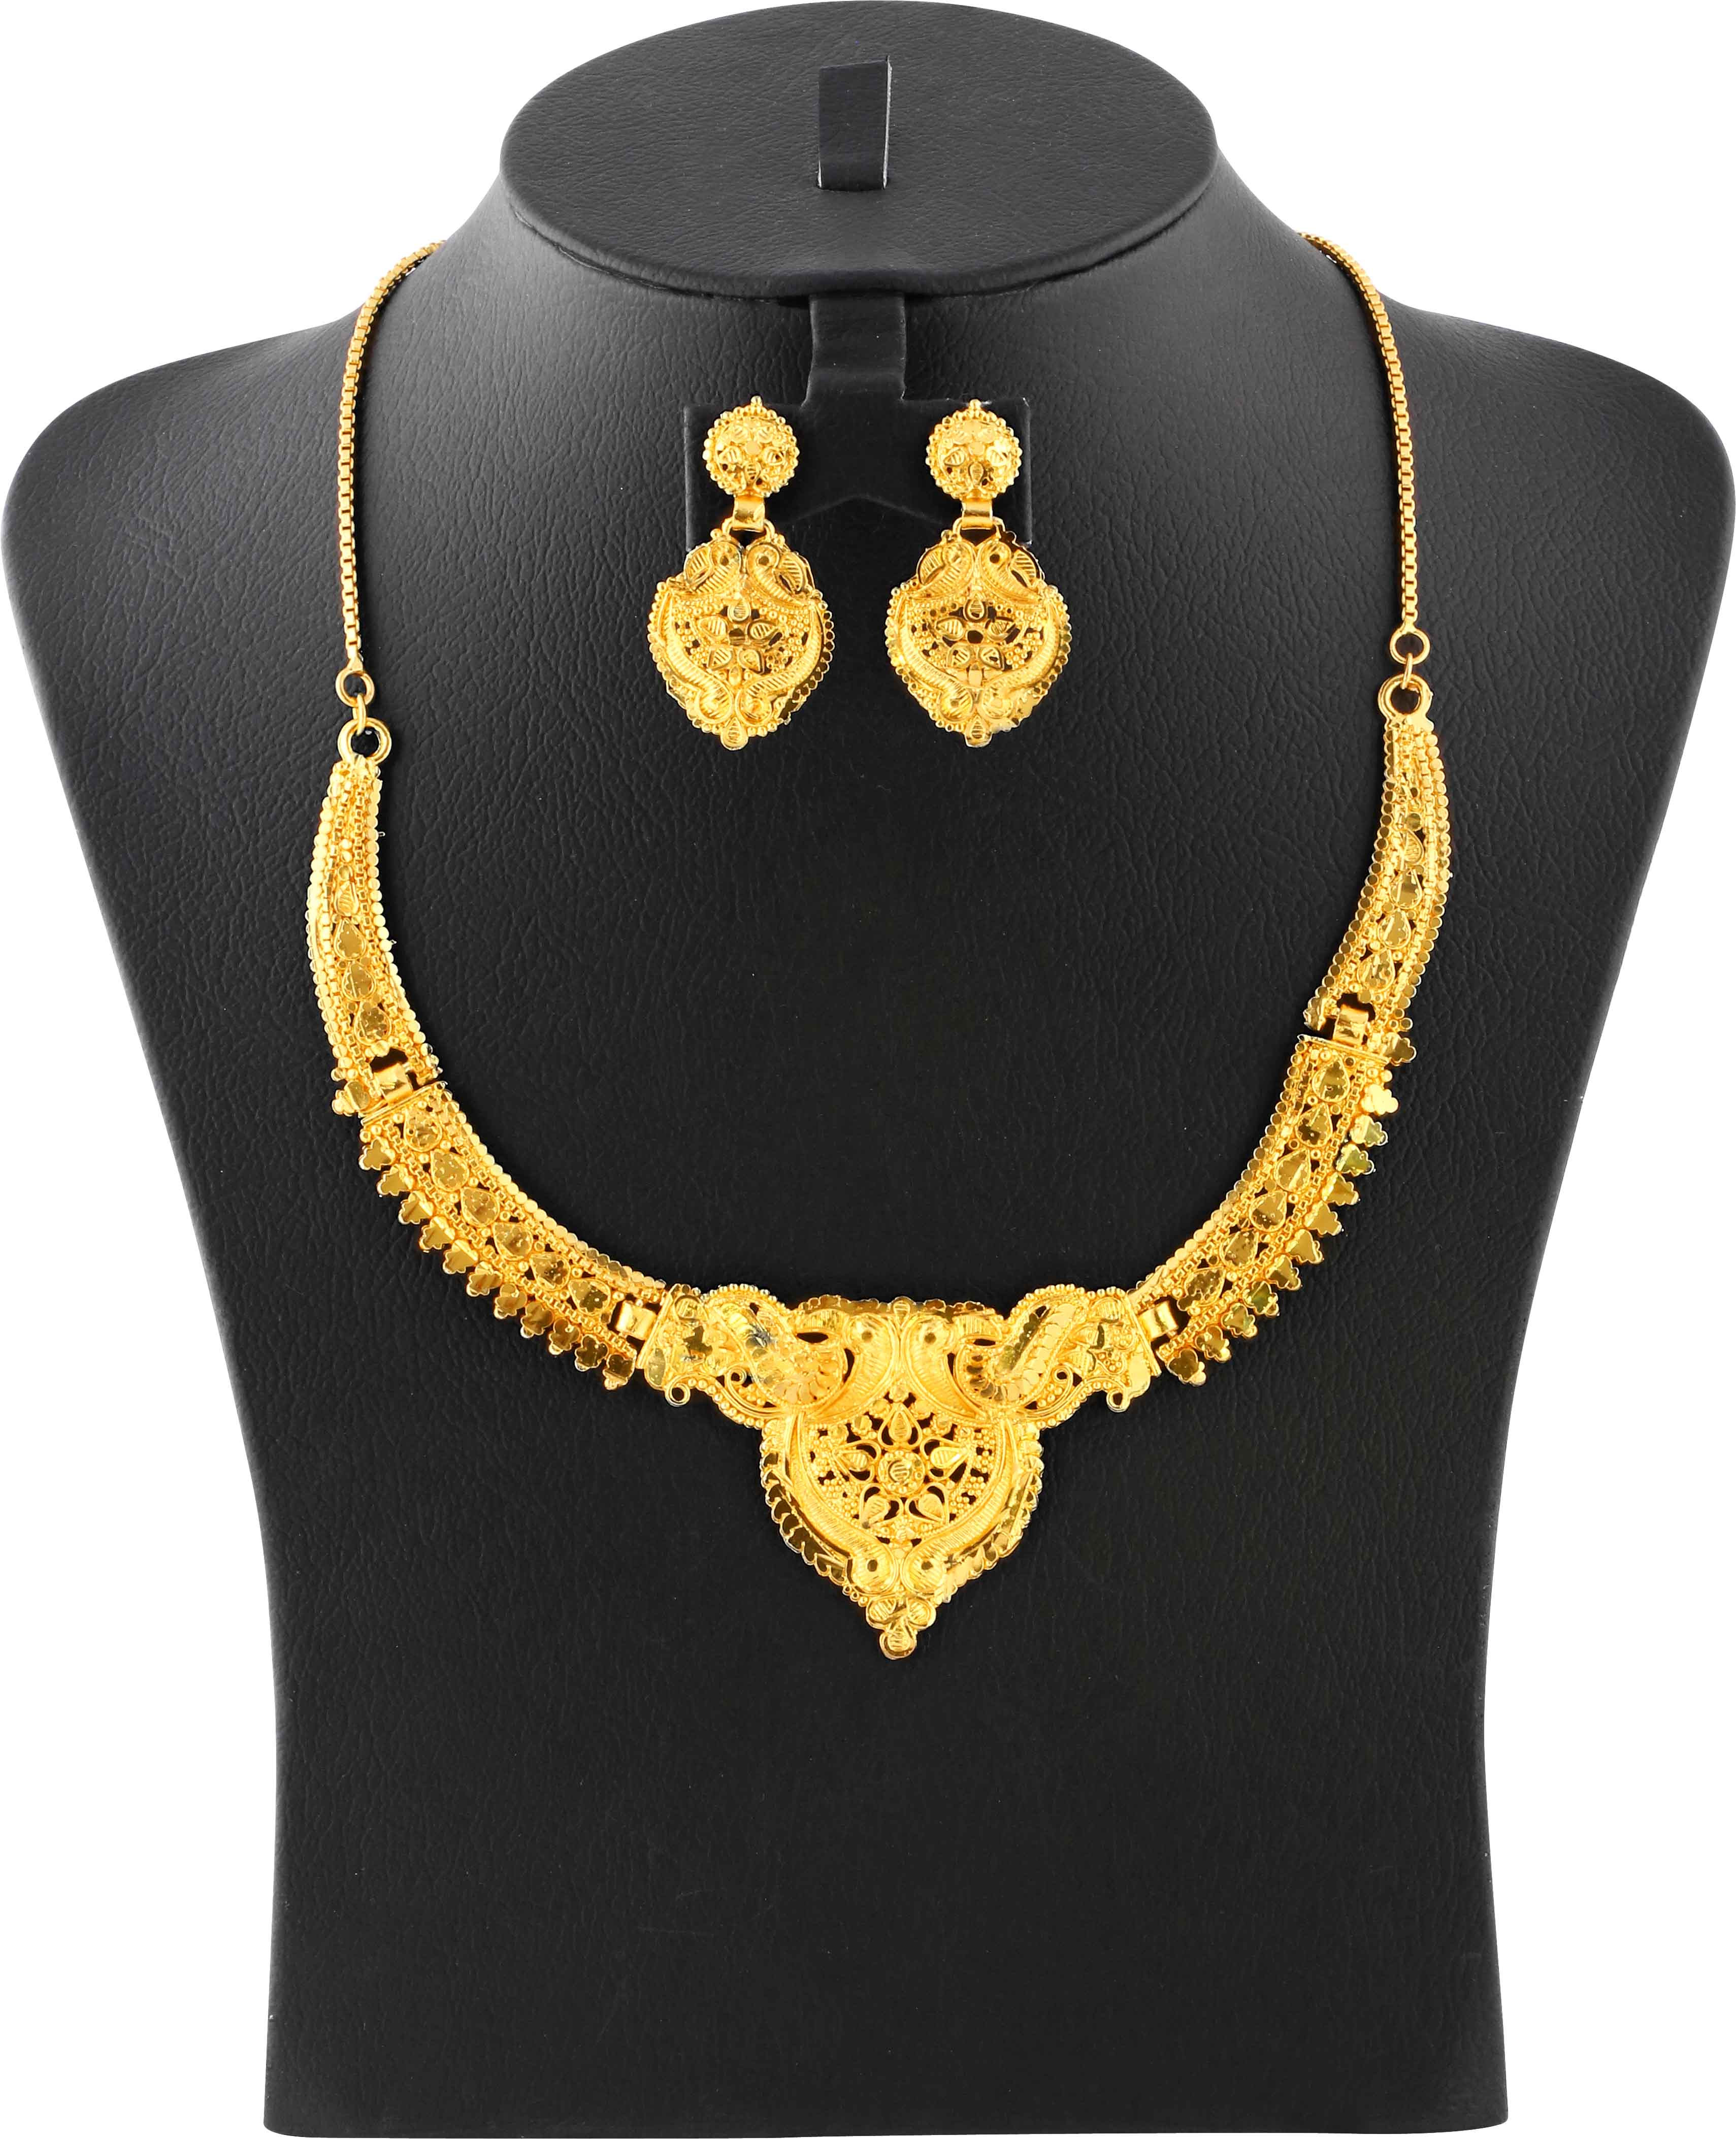 Buy Fidi 18K Gold Plated Necklace with Earring Set - FJ025 ...